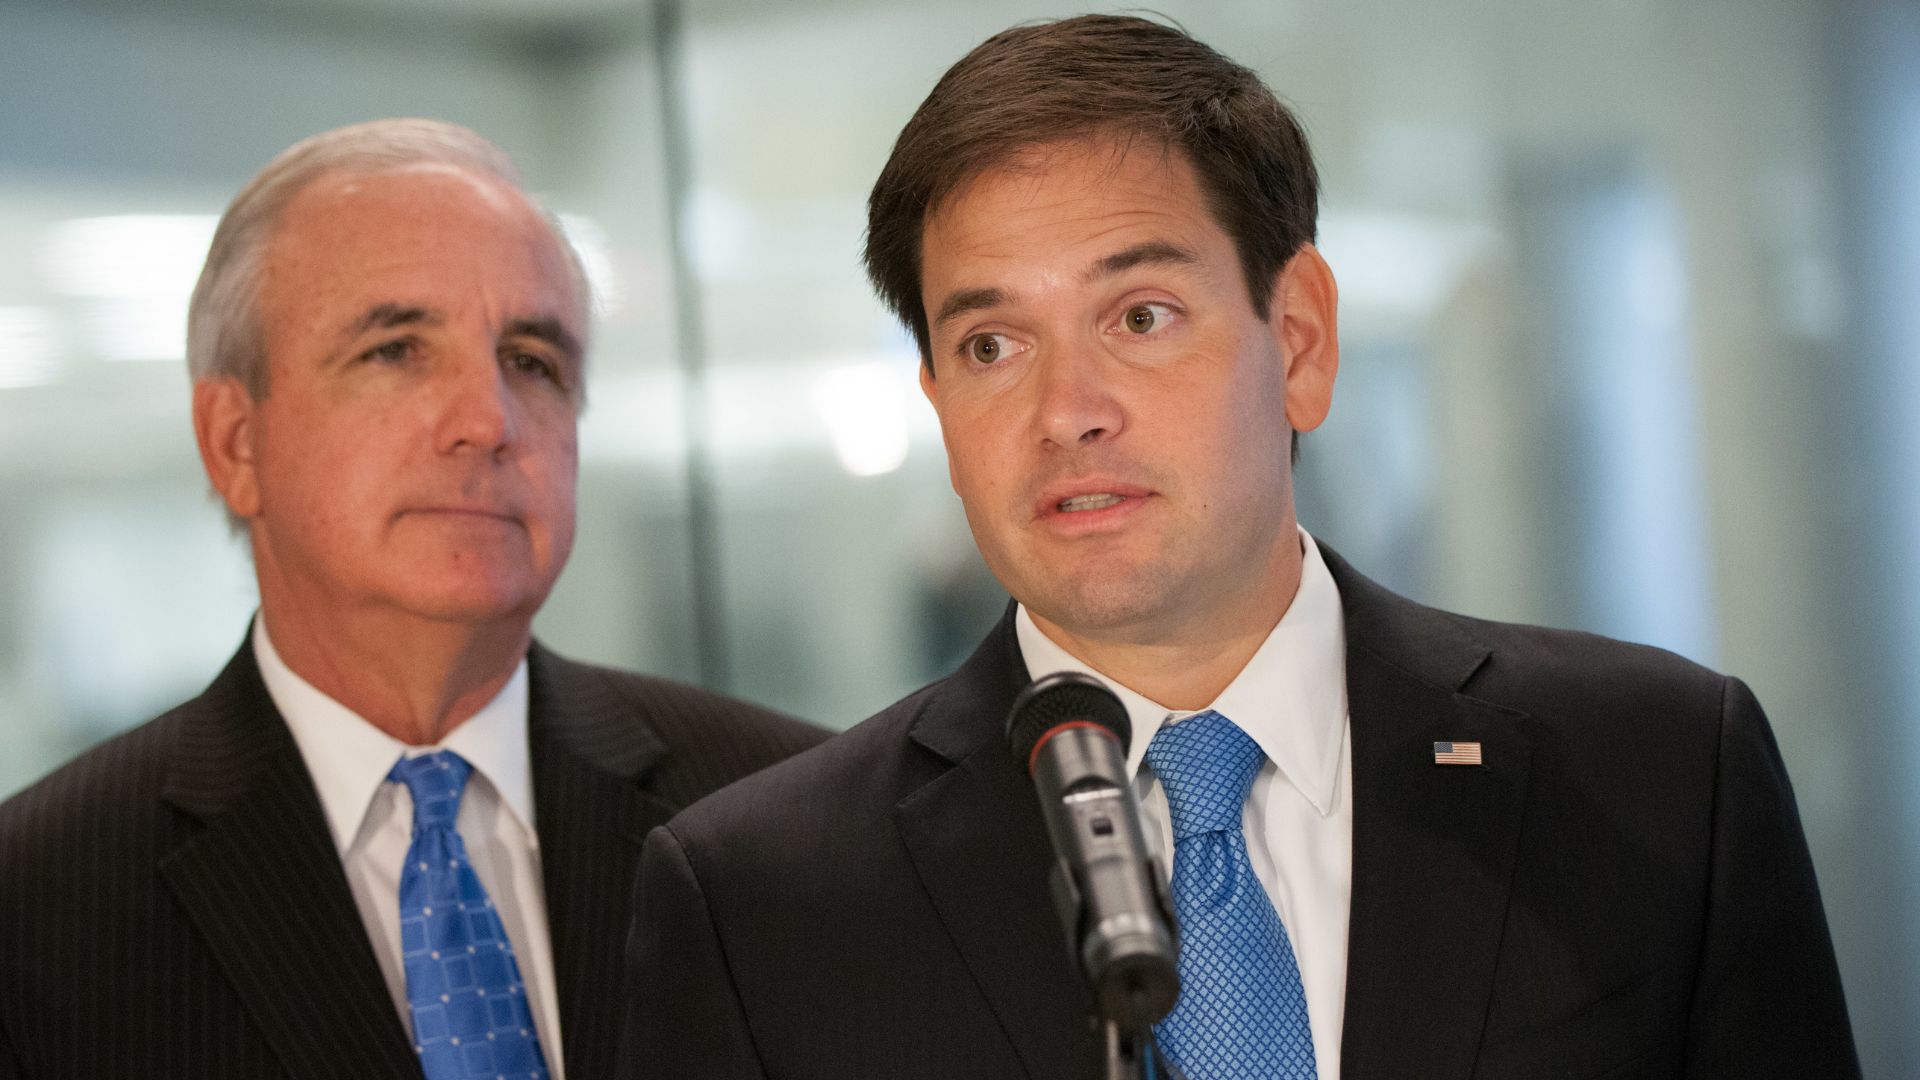 <p>Florida Republicans have slammed the Department of Homeland Security after they gave Cuban officials a tour of the Miami International Airport — and this tour included an inspection of so-called “sensitive” areas of the airport.     </p> <p>Now, many Florida lawmakers are calling for this incident to be investigated. They want their questions answered about what Cuban officials were able to see during this tour.  </p>